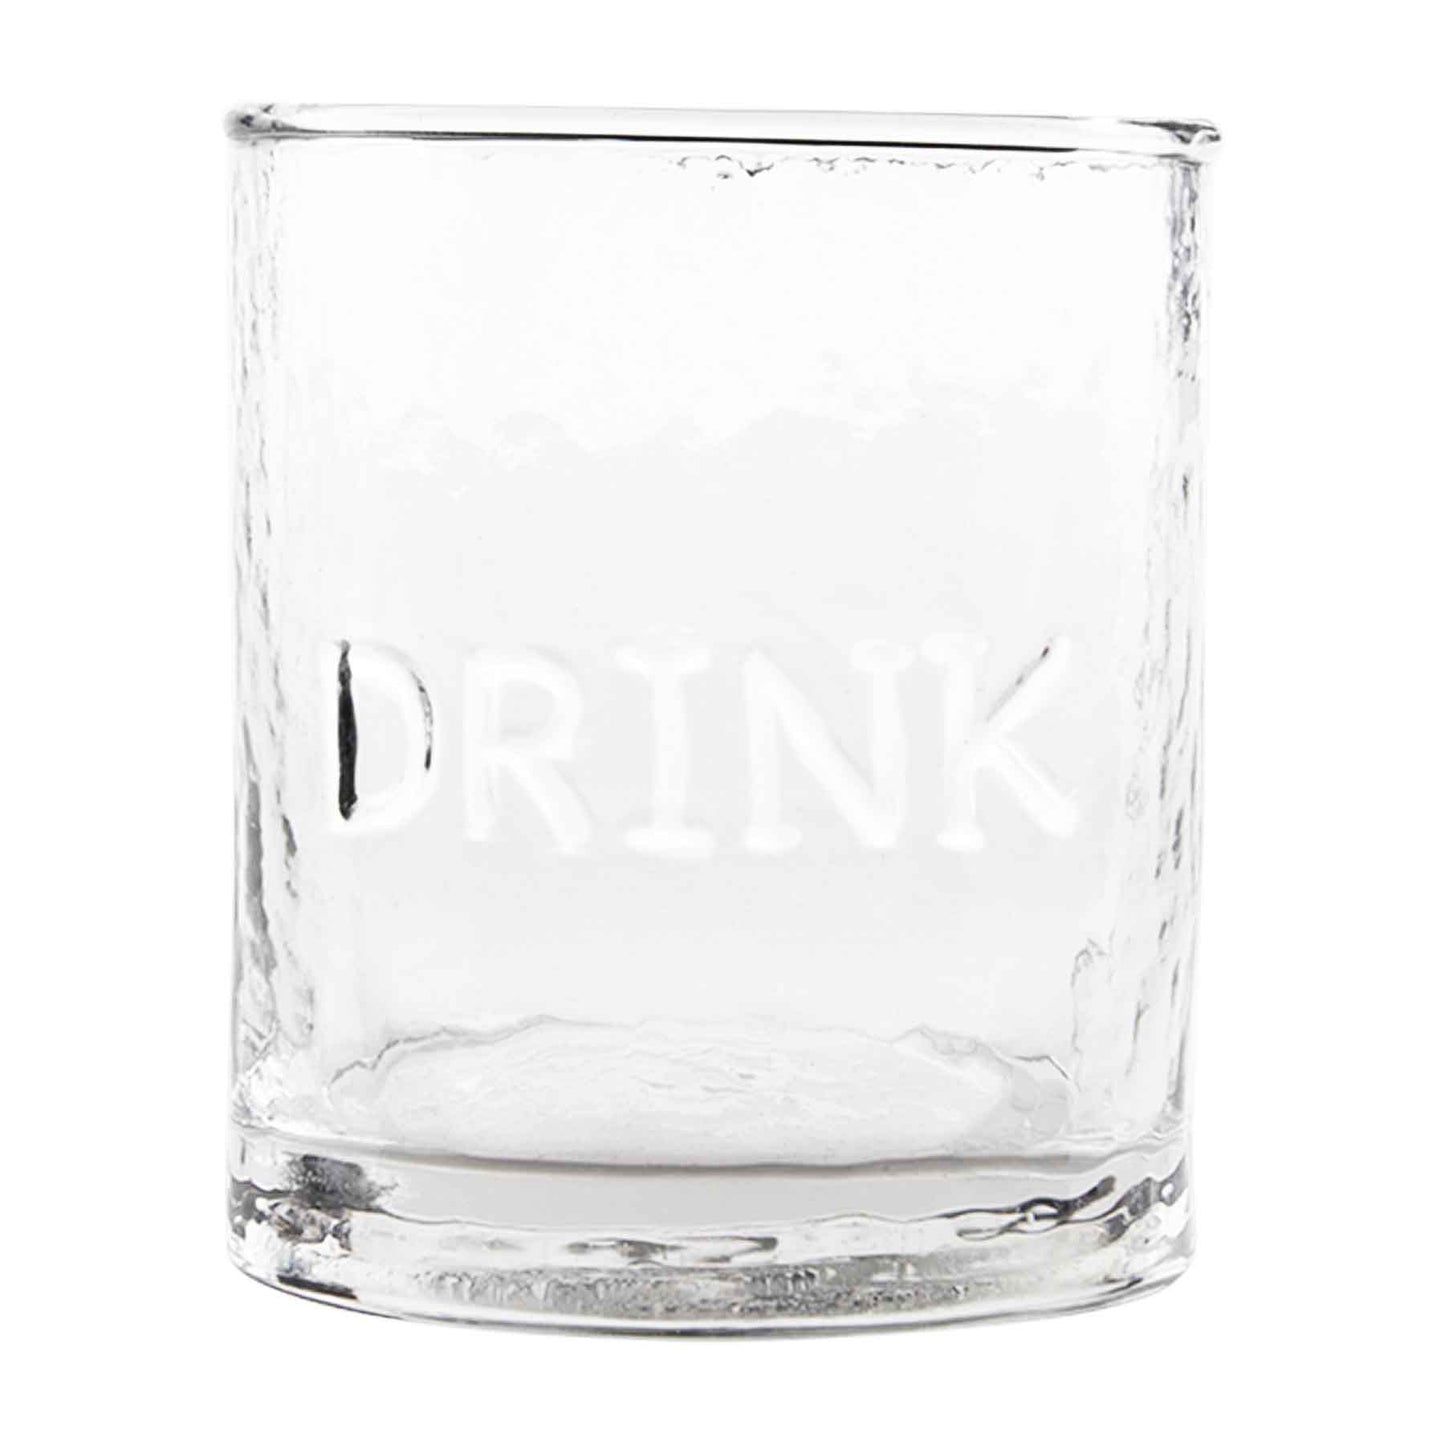 DRINK EMBOSSED GLASS SET OF 2